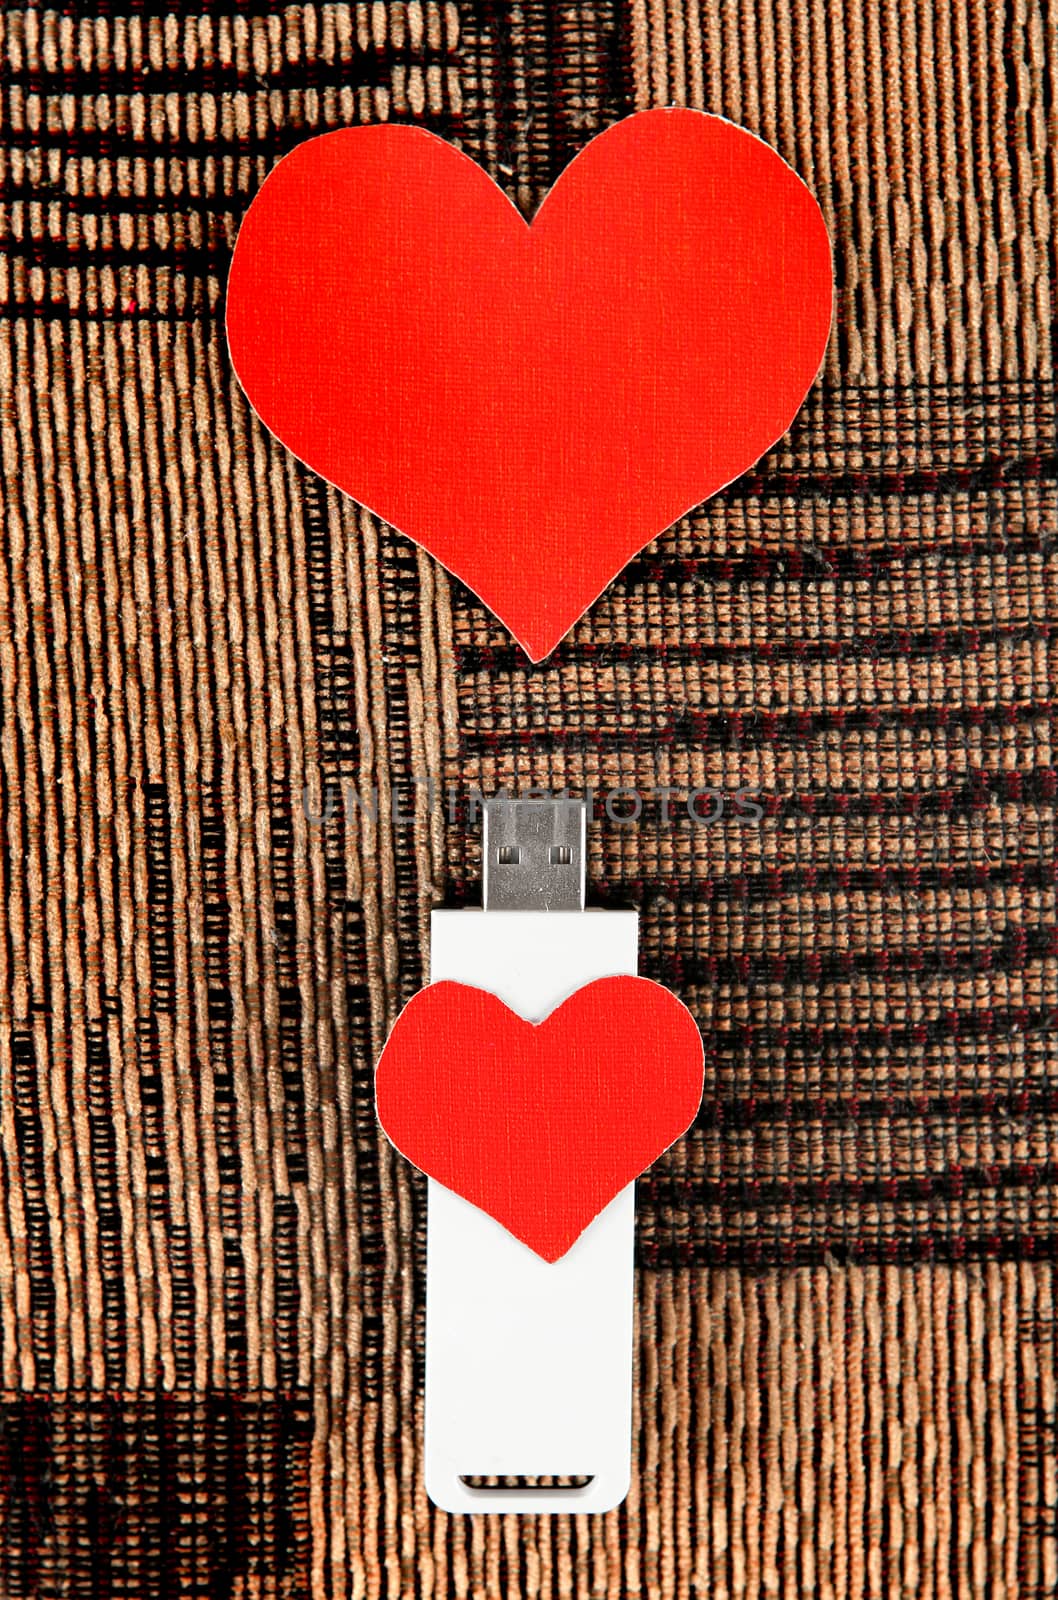 USB Flash Drive with Heart Shape on the Fabric Background